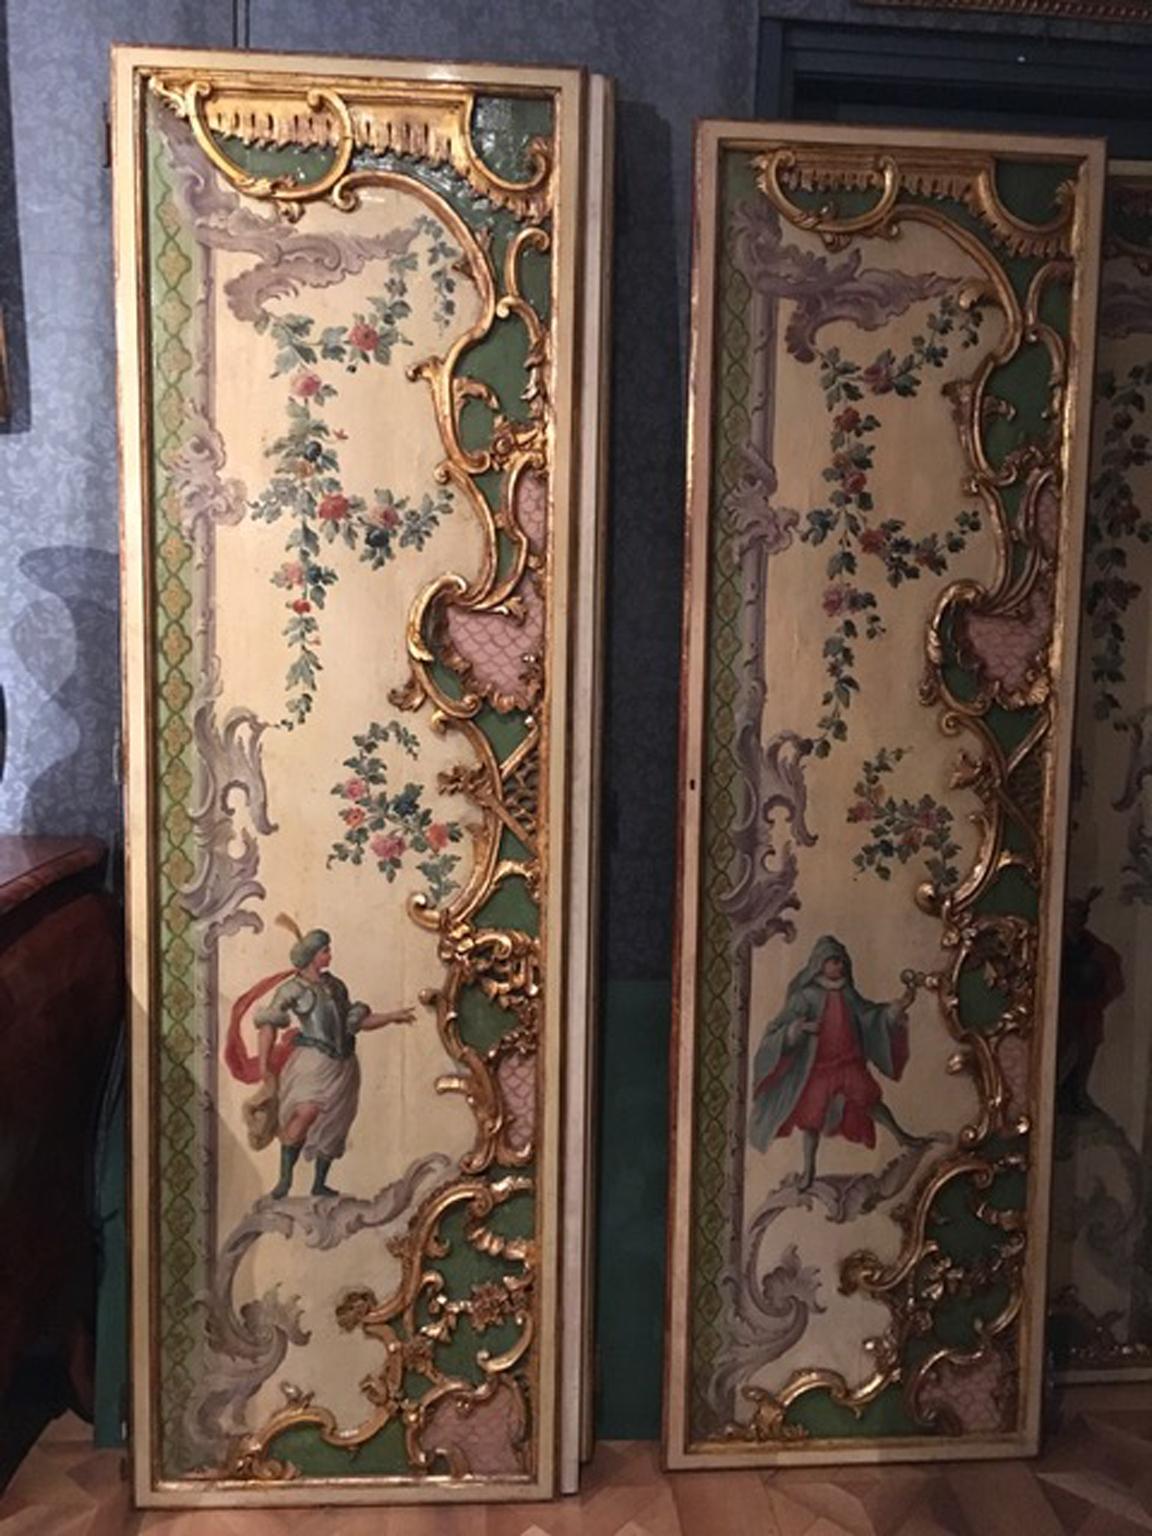 This wonderful pair of door panels are coming from the atelier of Andrea Urbani an Italian painter born in Venice in 1711 and living in the Venetian area, where he worked for the most important families of the country, by decorating their